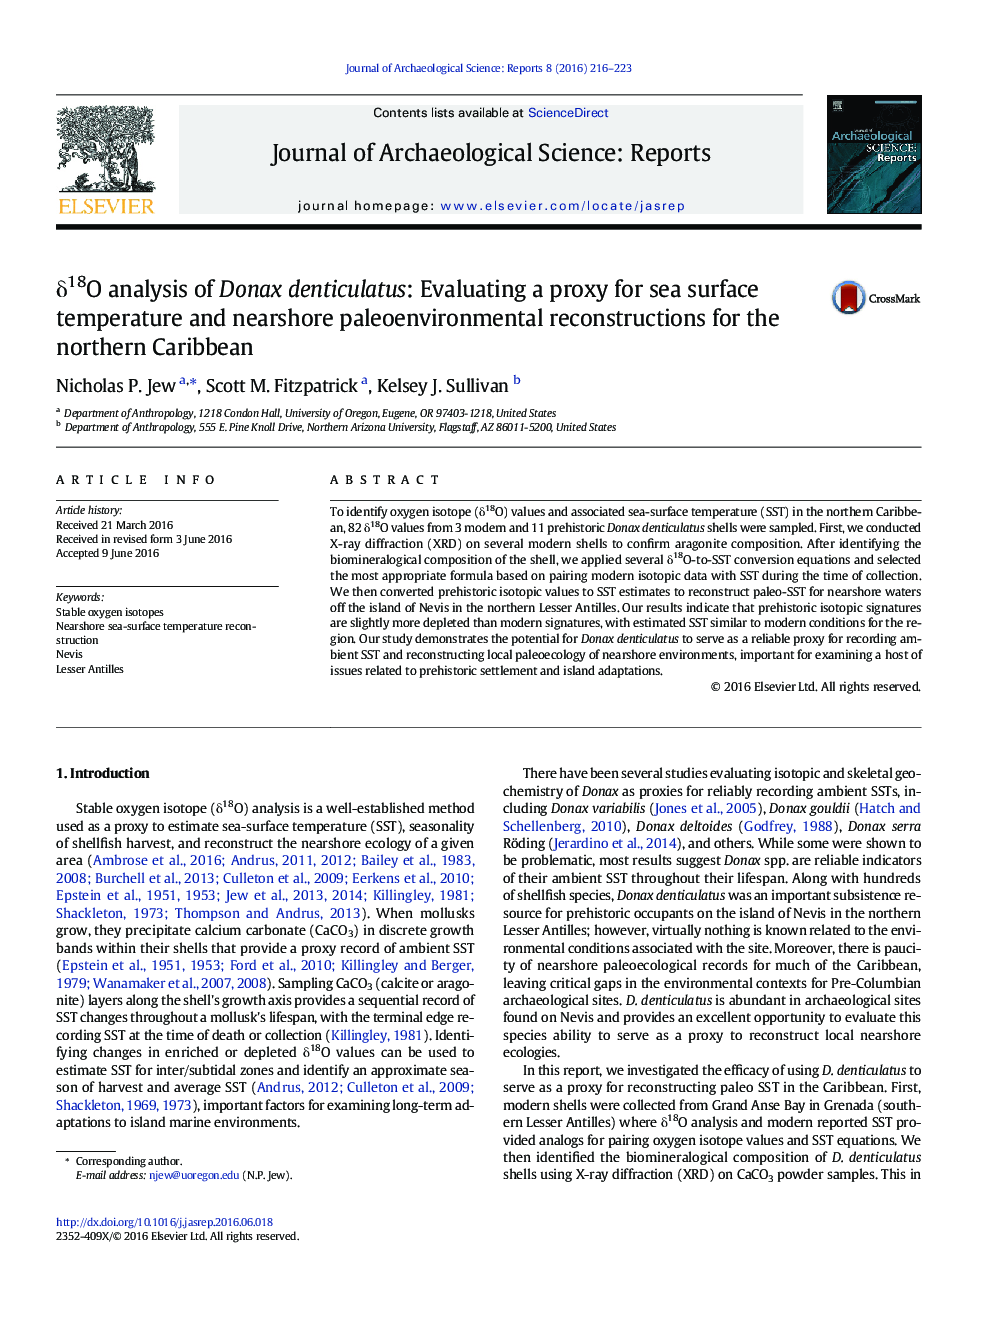 Î´18O analysis of Donax denticulatus: Evaluating a proxy for sea surface temperature and nearshore paleoenvironmental reconstructions for the northern Caribbean